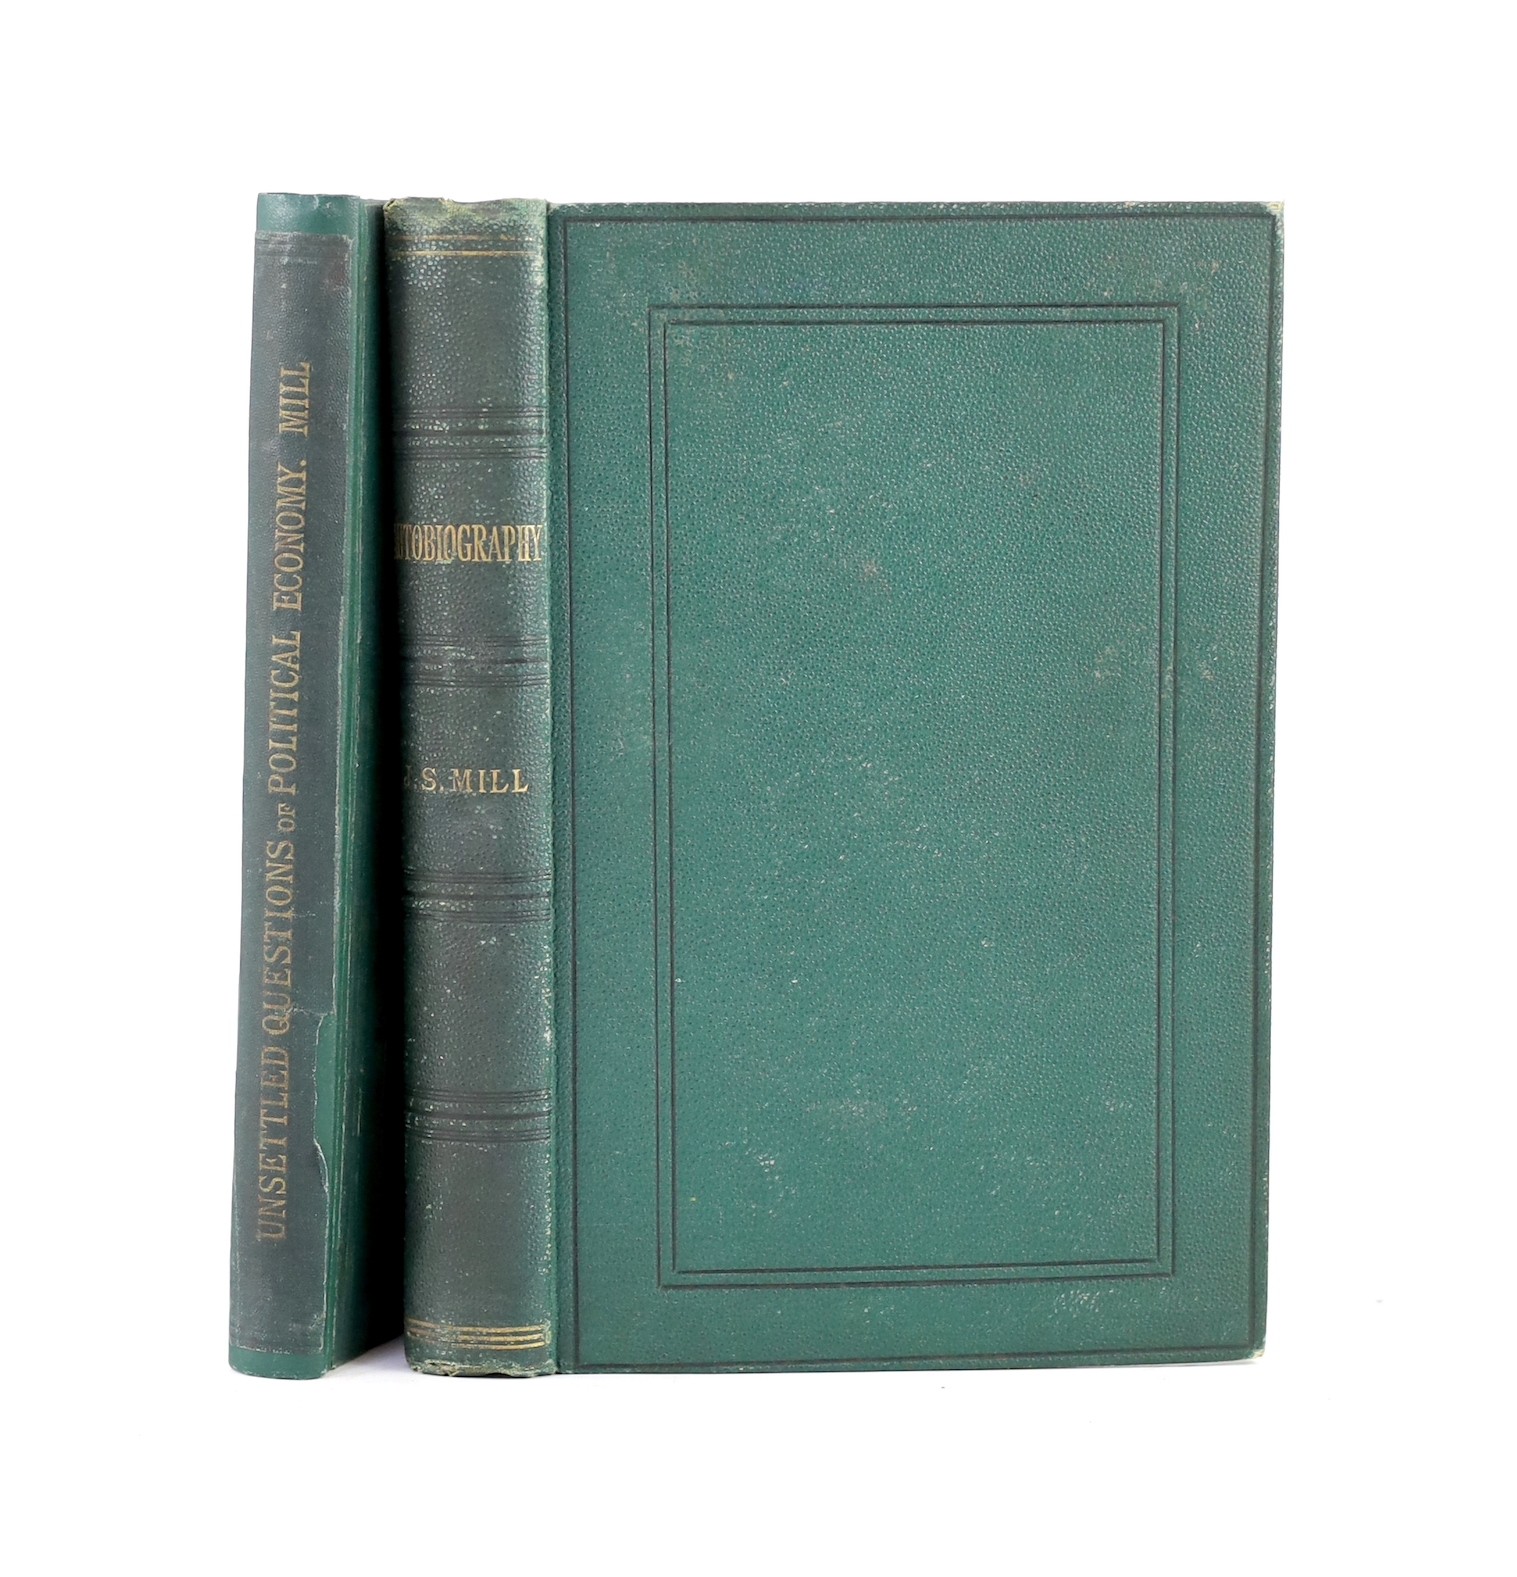 Mill, John Stuart-Autobiography. First Edition. half title, erratum slip and advert. leaf; original black and gilt-ruled and gilt lettered cloth. 1873; Mill, John Stuart - Essays on Some Unsettled Questions of Political